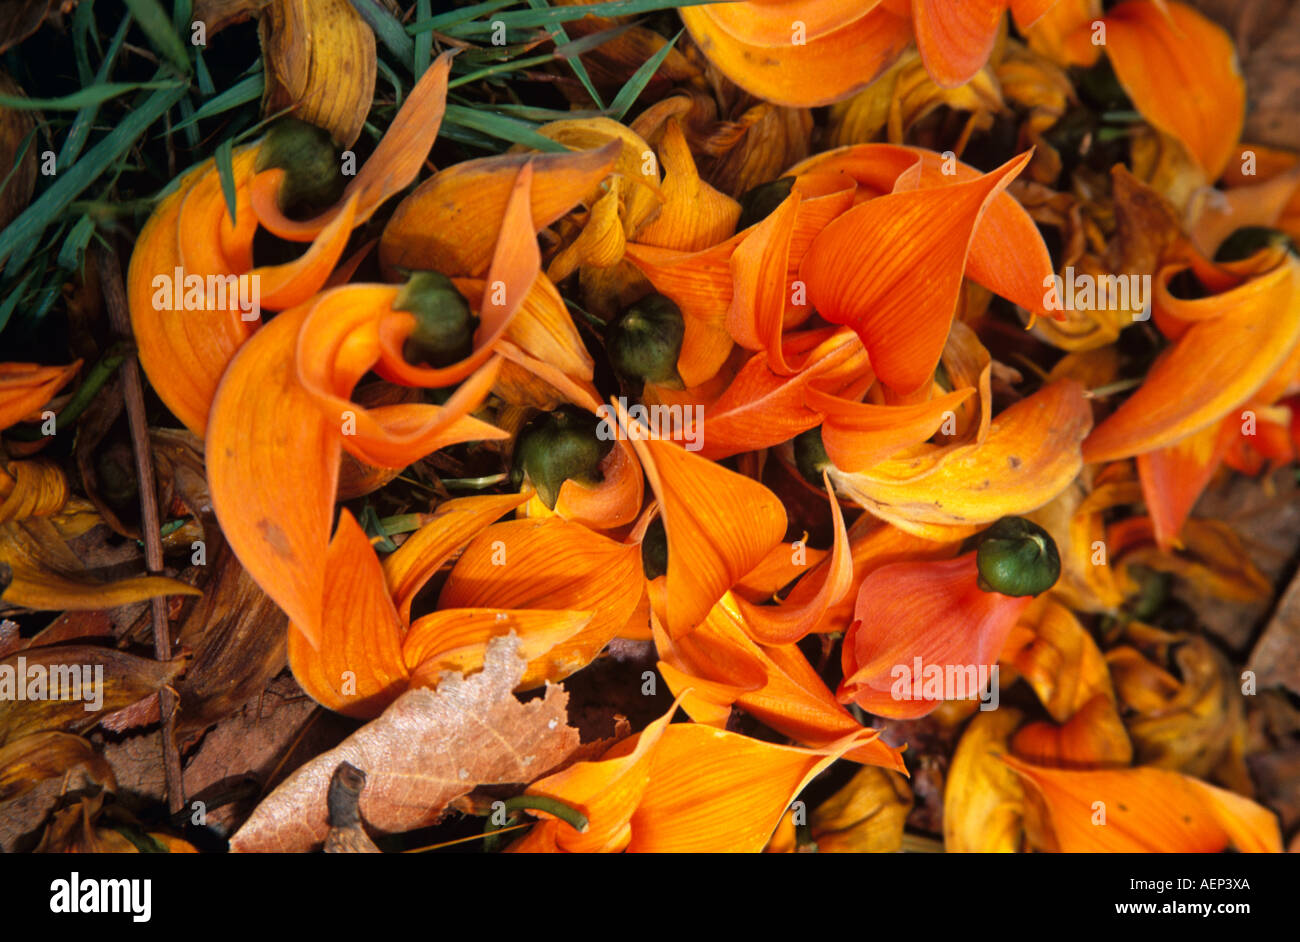 Brightly coloured flowers from a coral tree, Erythrina subumbrans, on the ground, Thailand Stock Photo